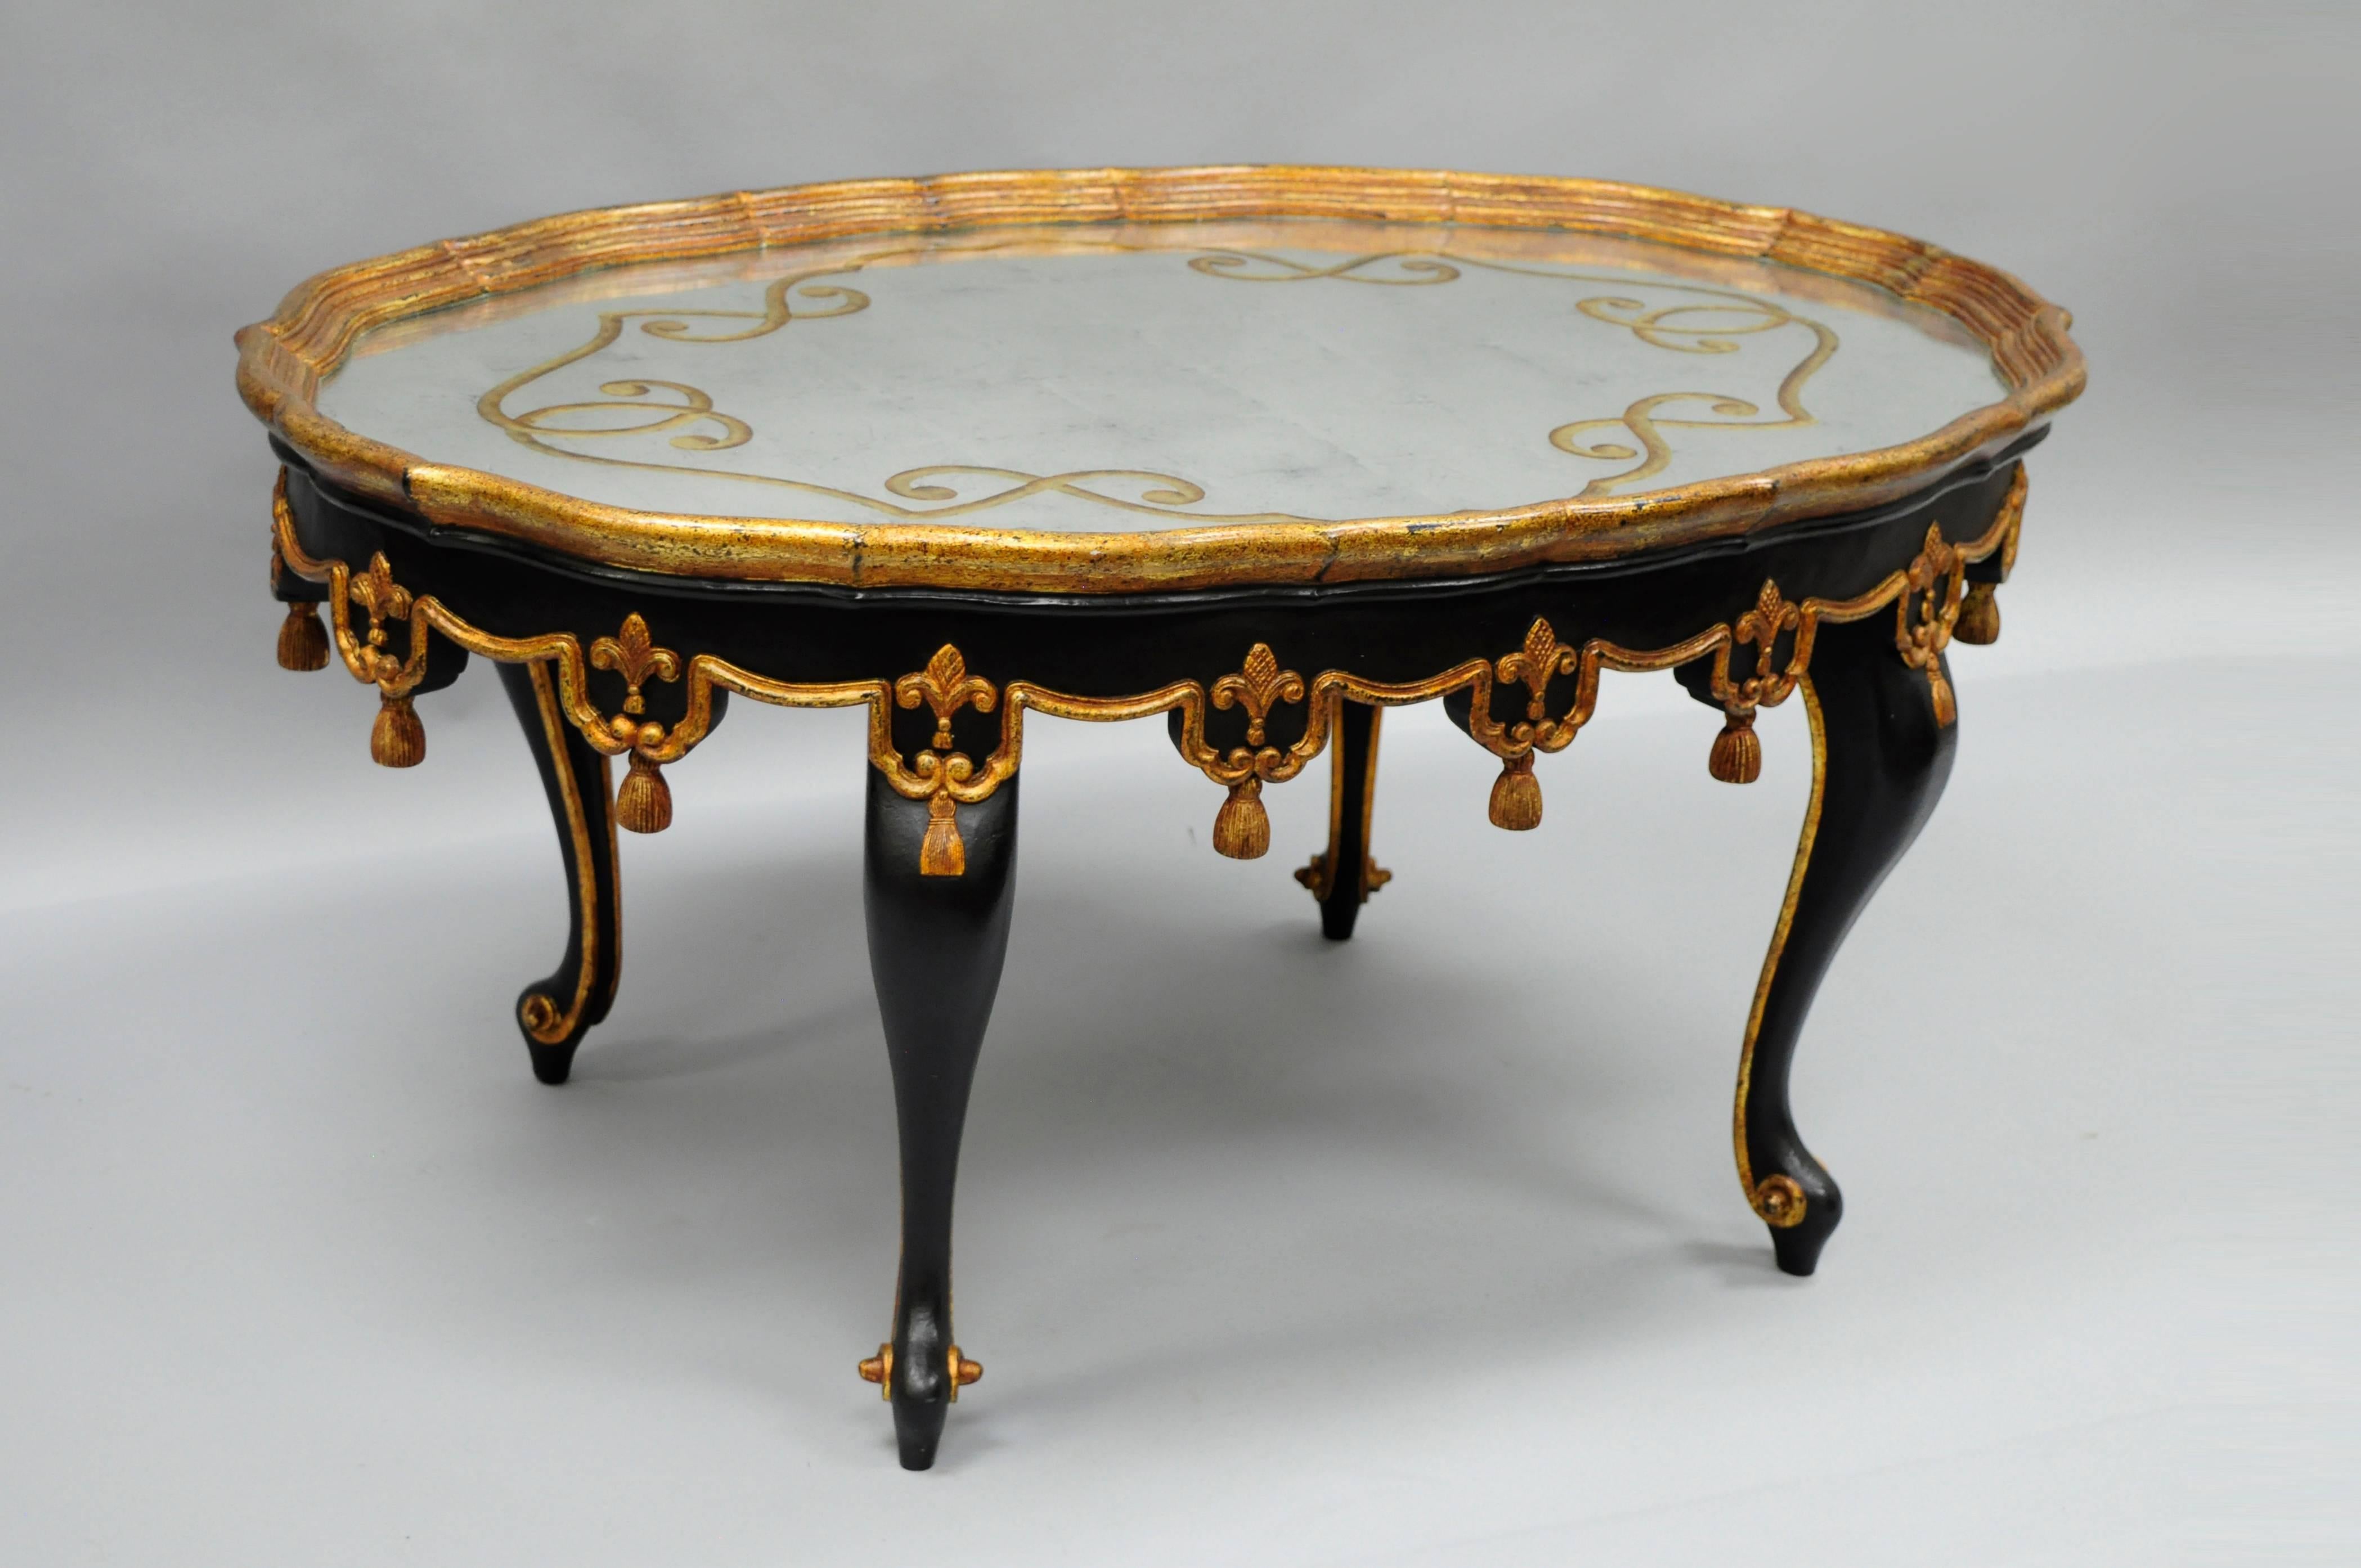 Gorgeous black and gold gilt coffee table in the Maison Jansen / French Louis XVI style attributed to John Richard. Table features a carved wood tassel skirt, scrolling cabriole legs, and a beautiful églomisé decorated mirrored glass top.